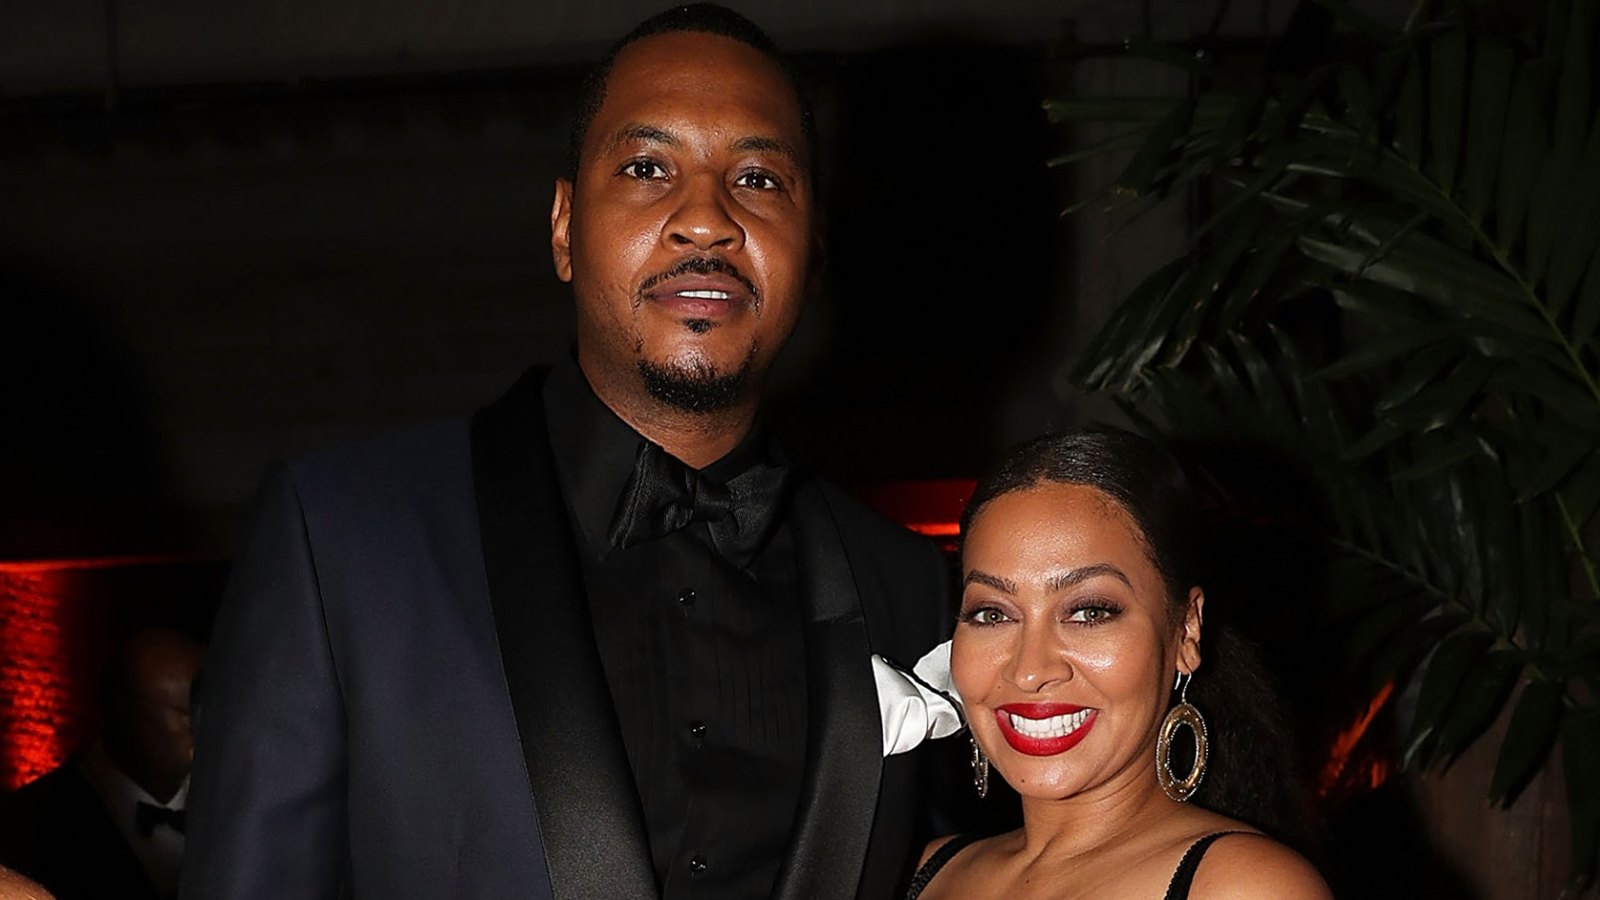 La La Anthony Carmelo Anthony Expecting Baby number 2 After Reconciliation